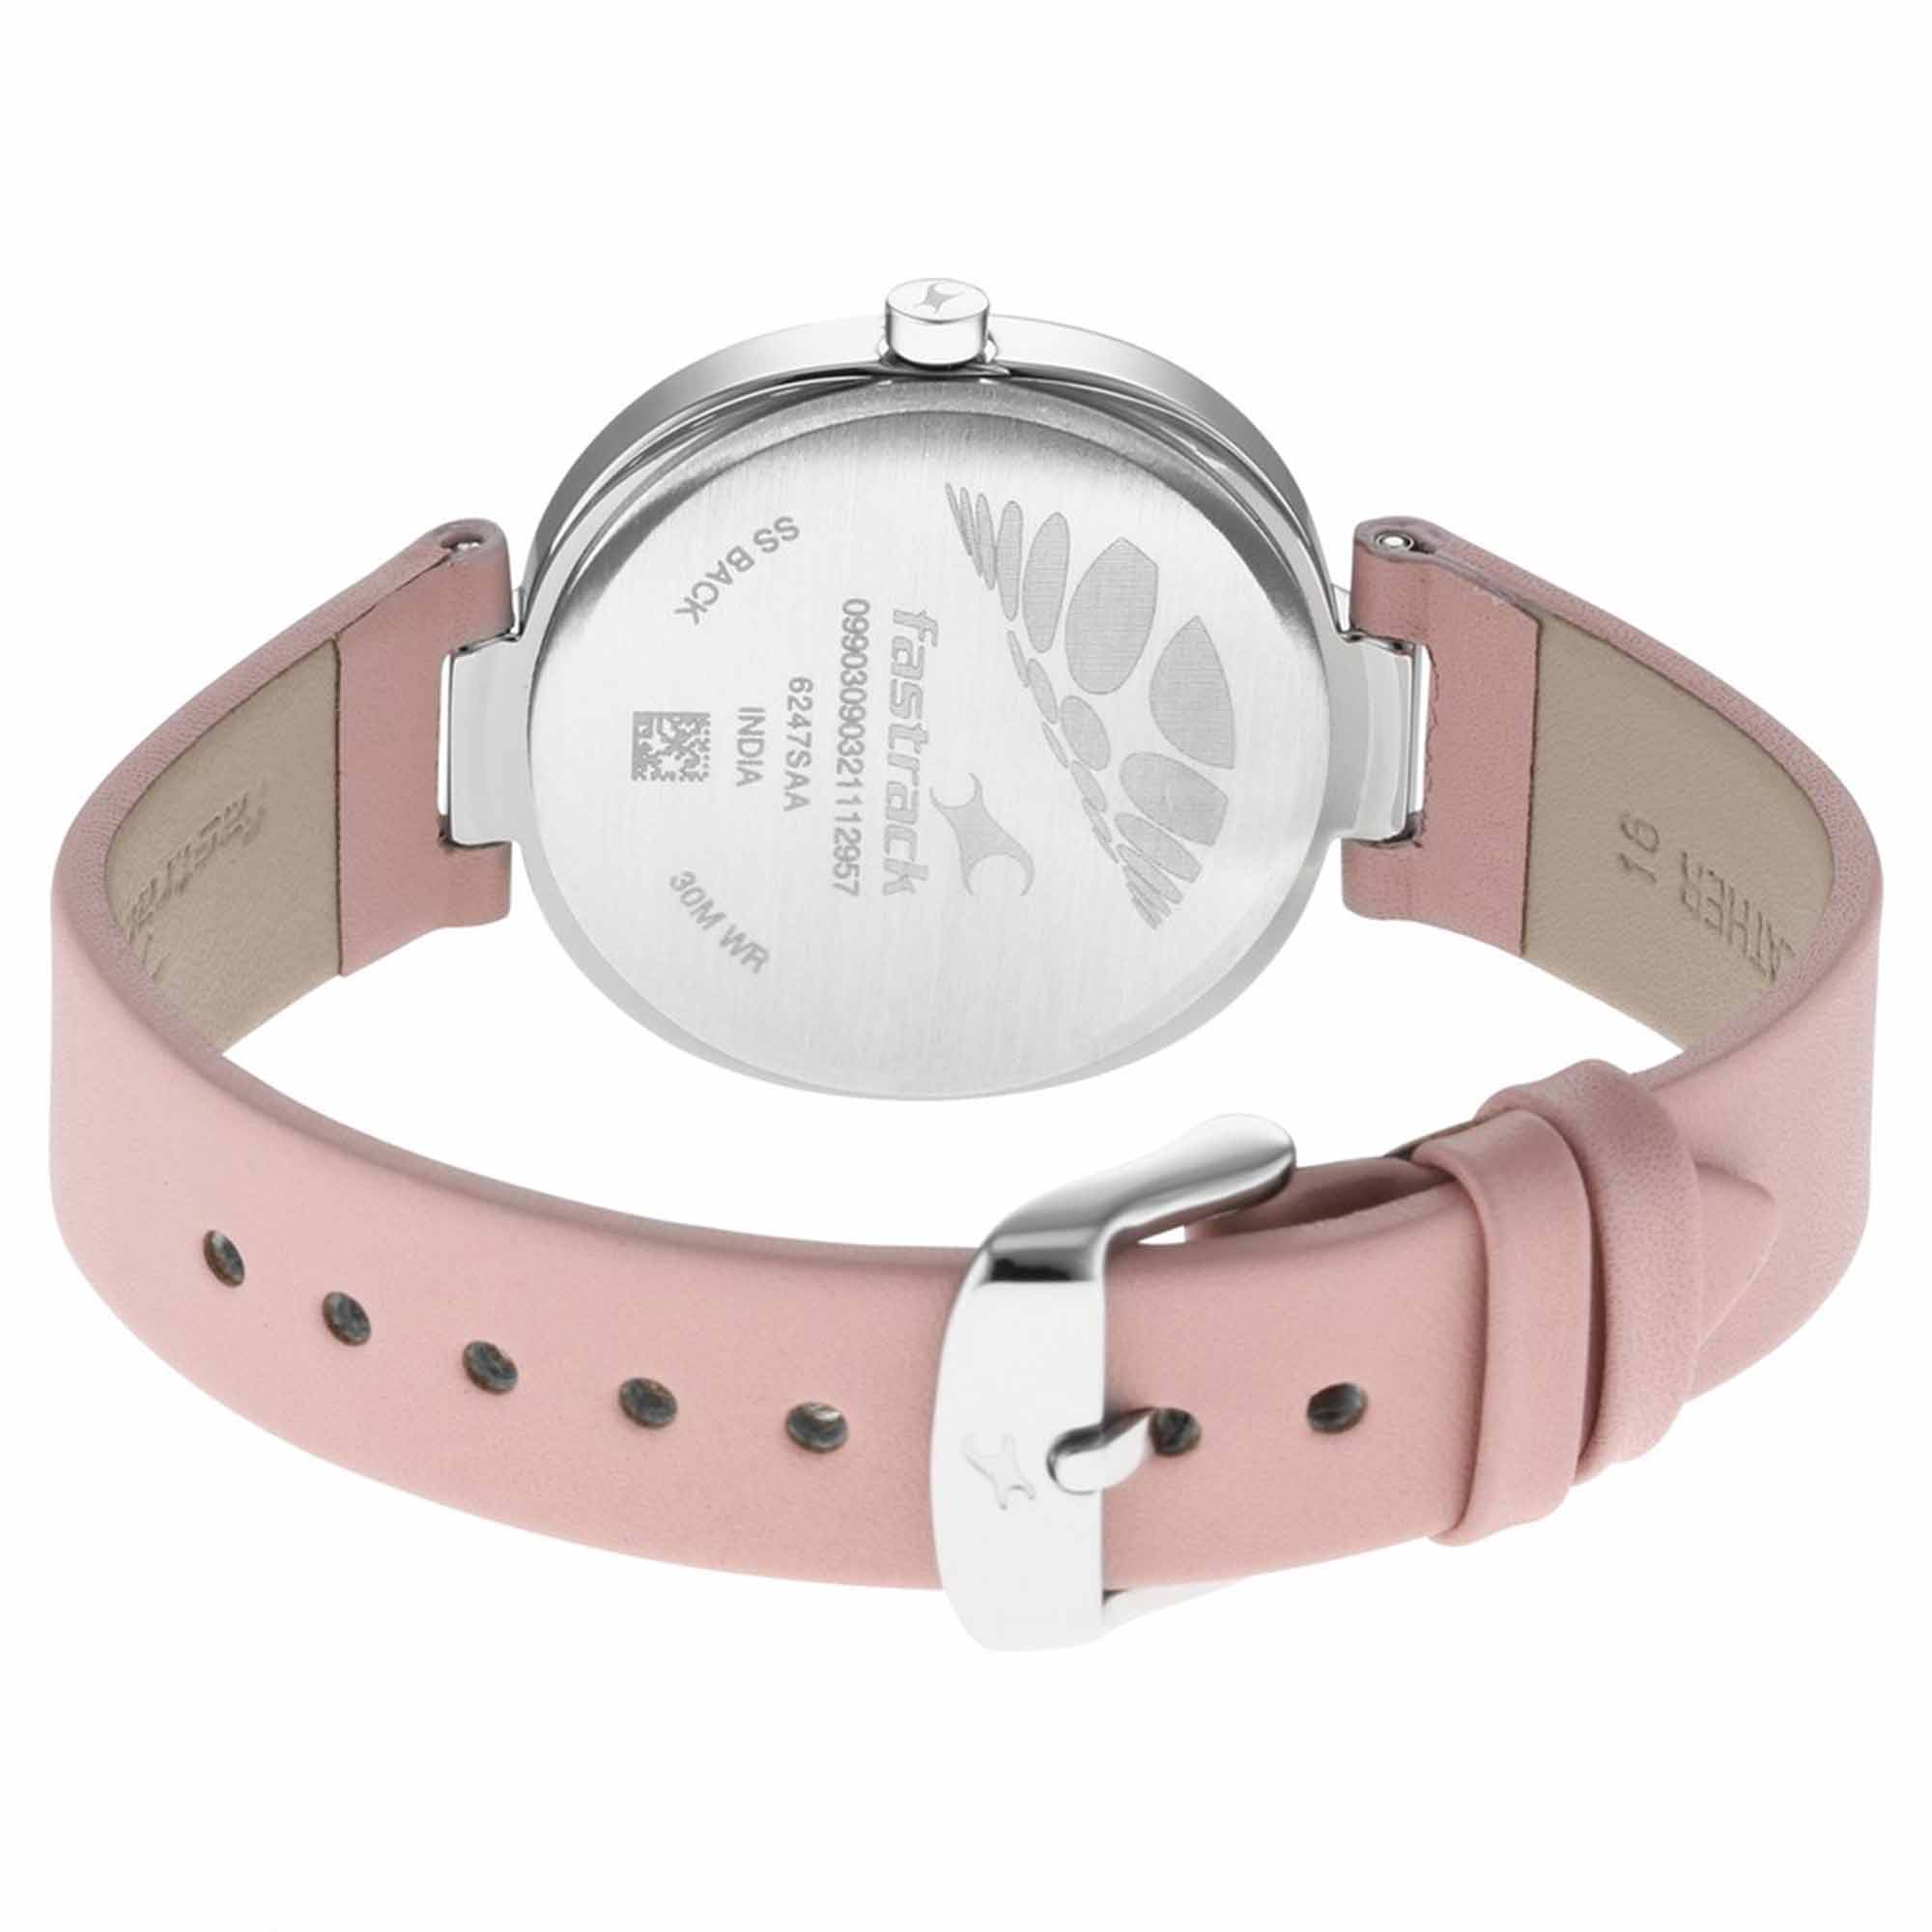 Fastrack Stunners Quartz Analog Pink Dial Leather Strap Watch for Girls